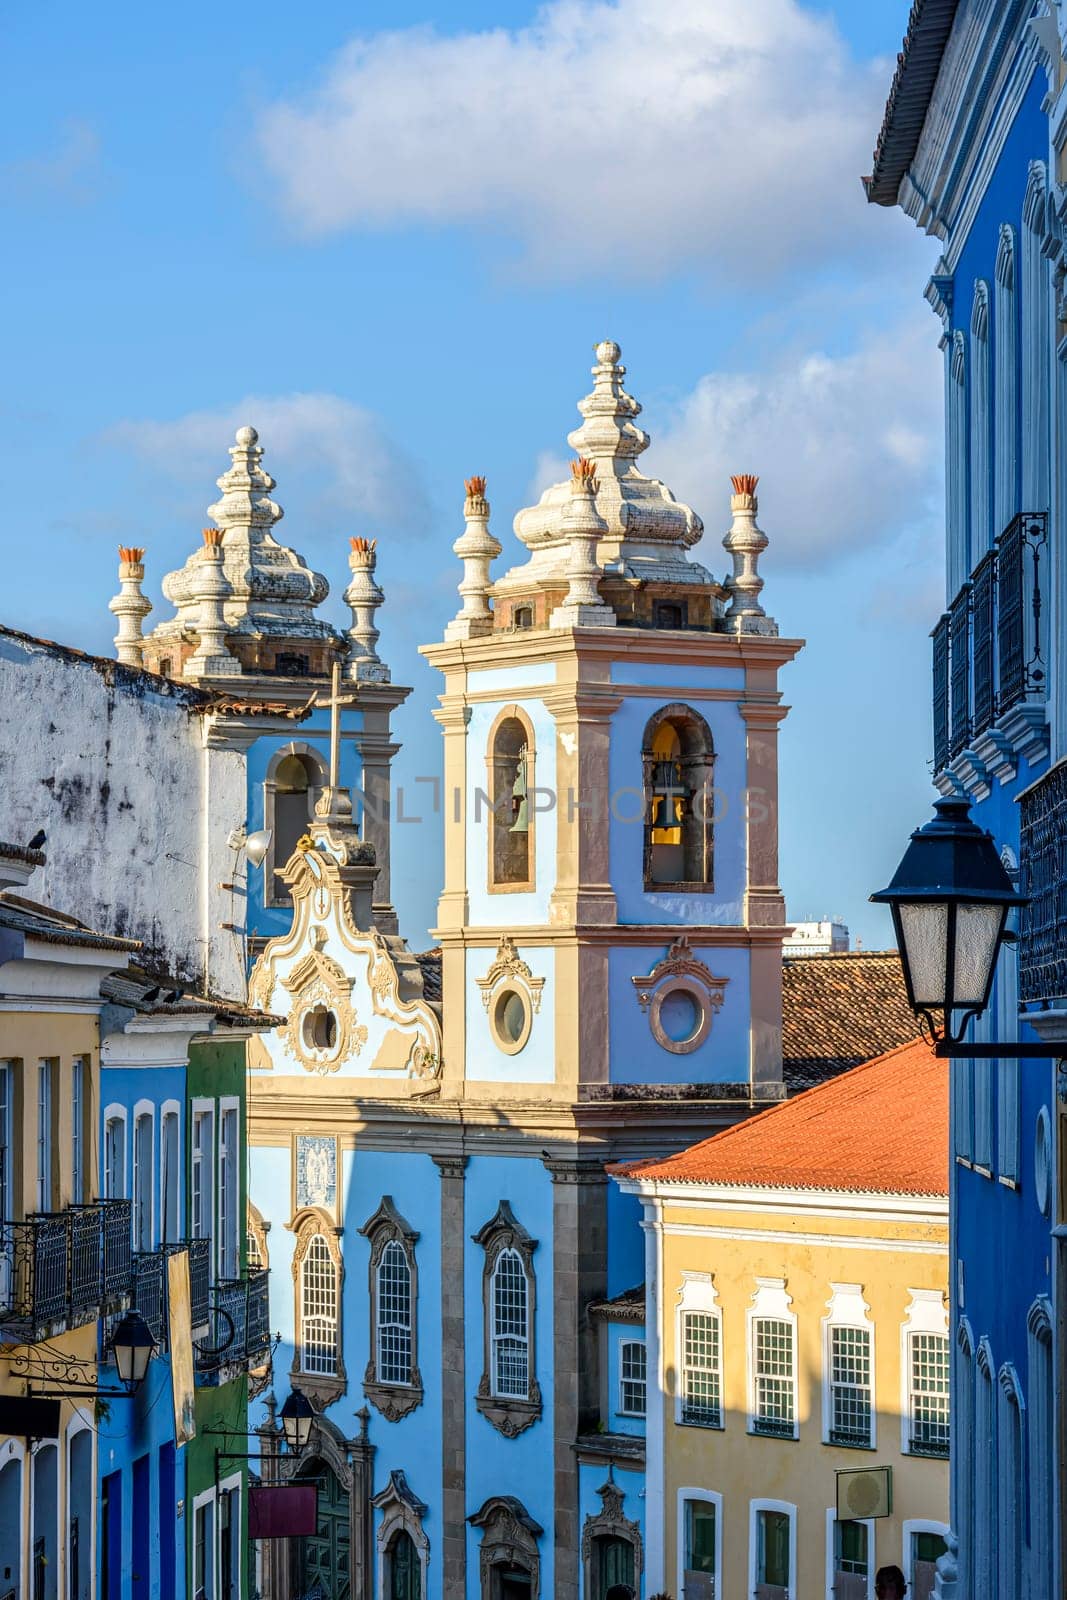 Old facades of colorful colonial-style houses, lanterns and windows and a tower of an old baroque church in Pelourinho, the famous historic center of Salvador, Bahia